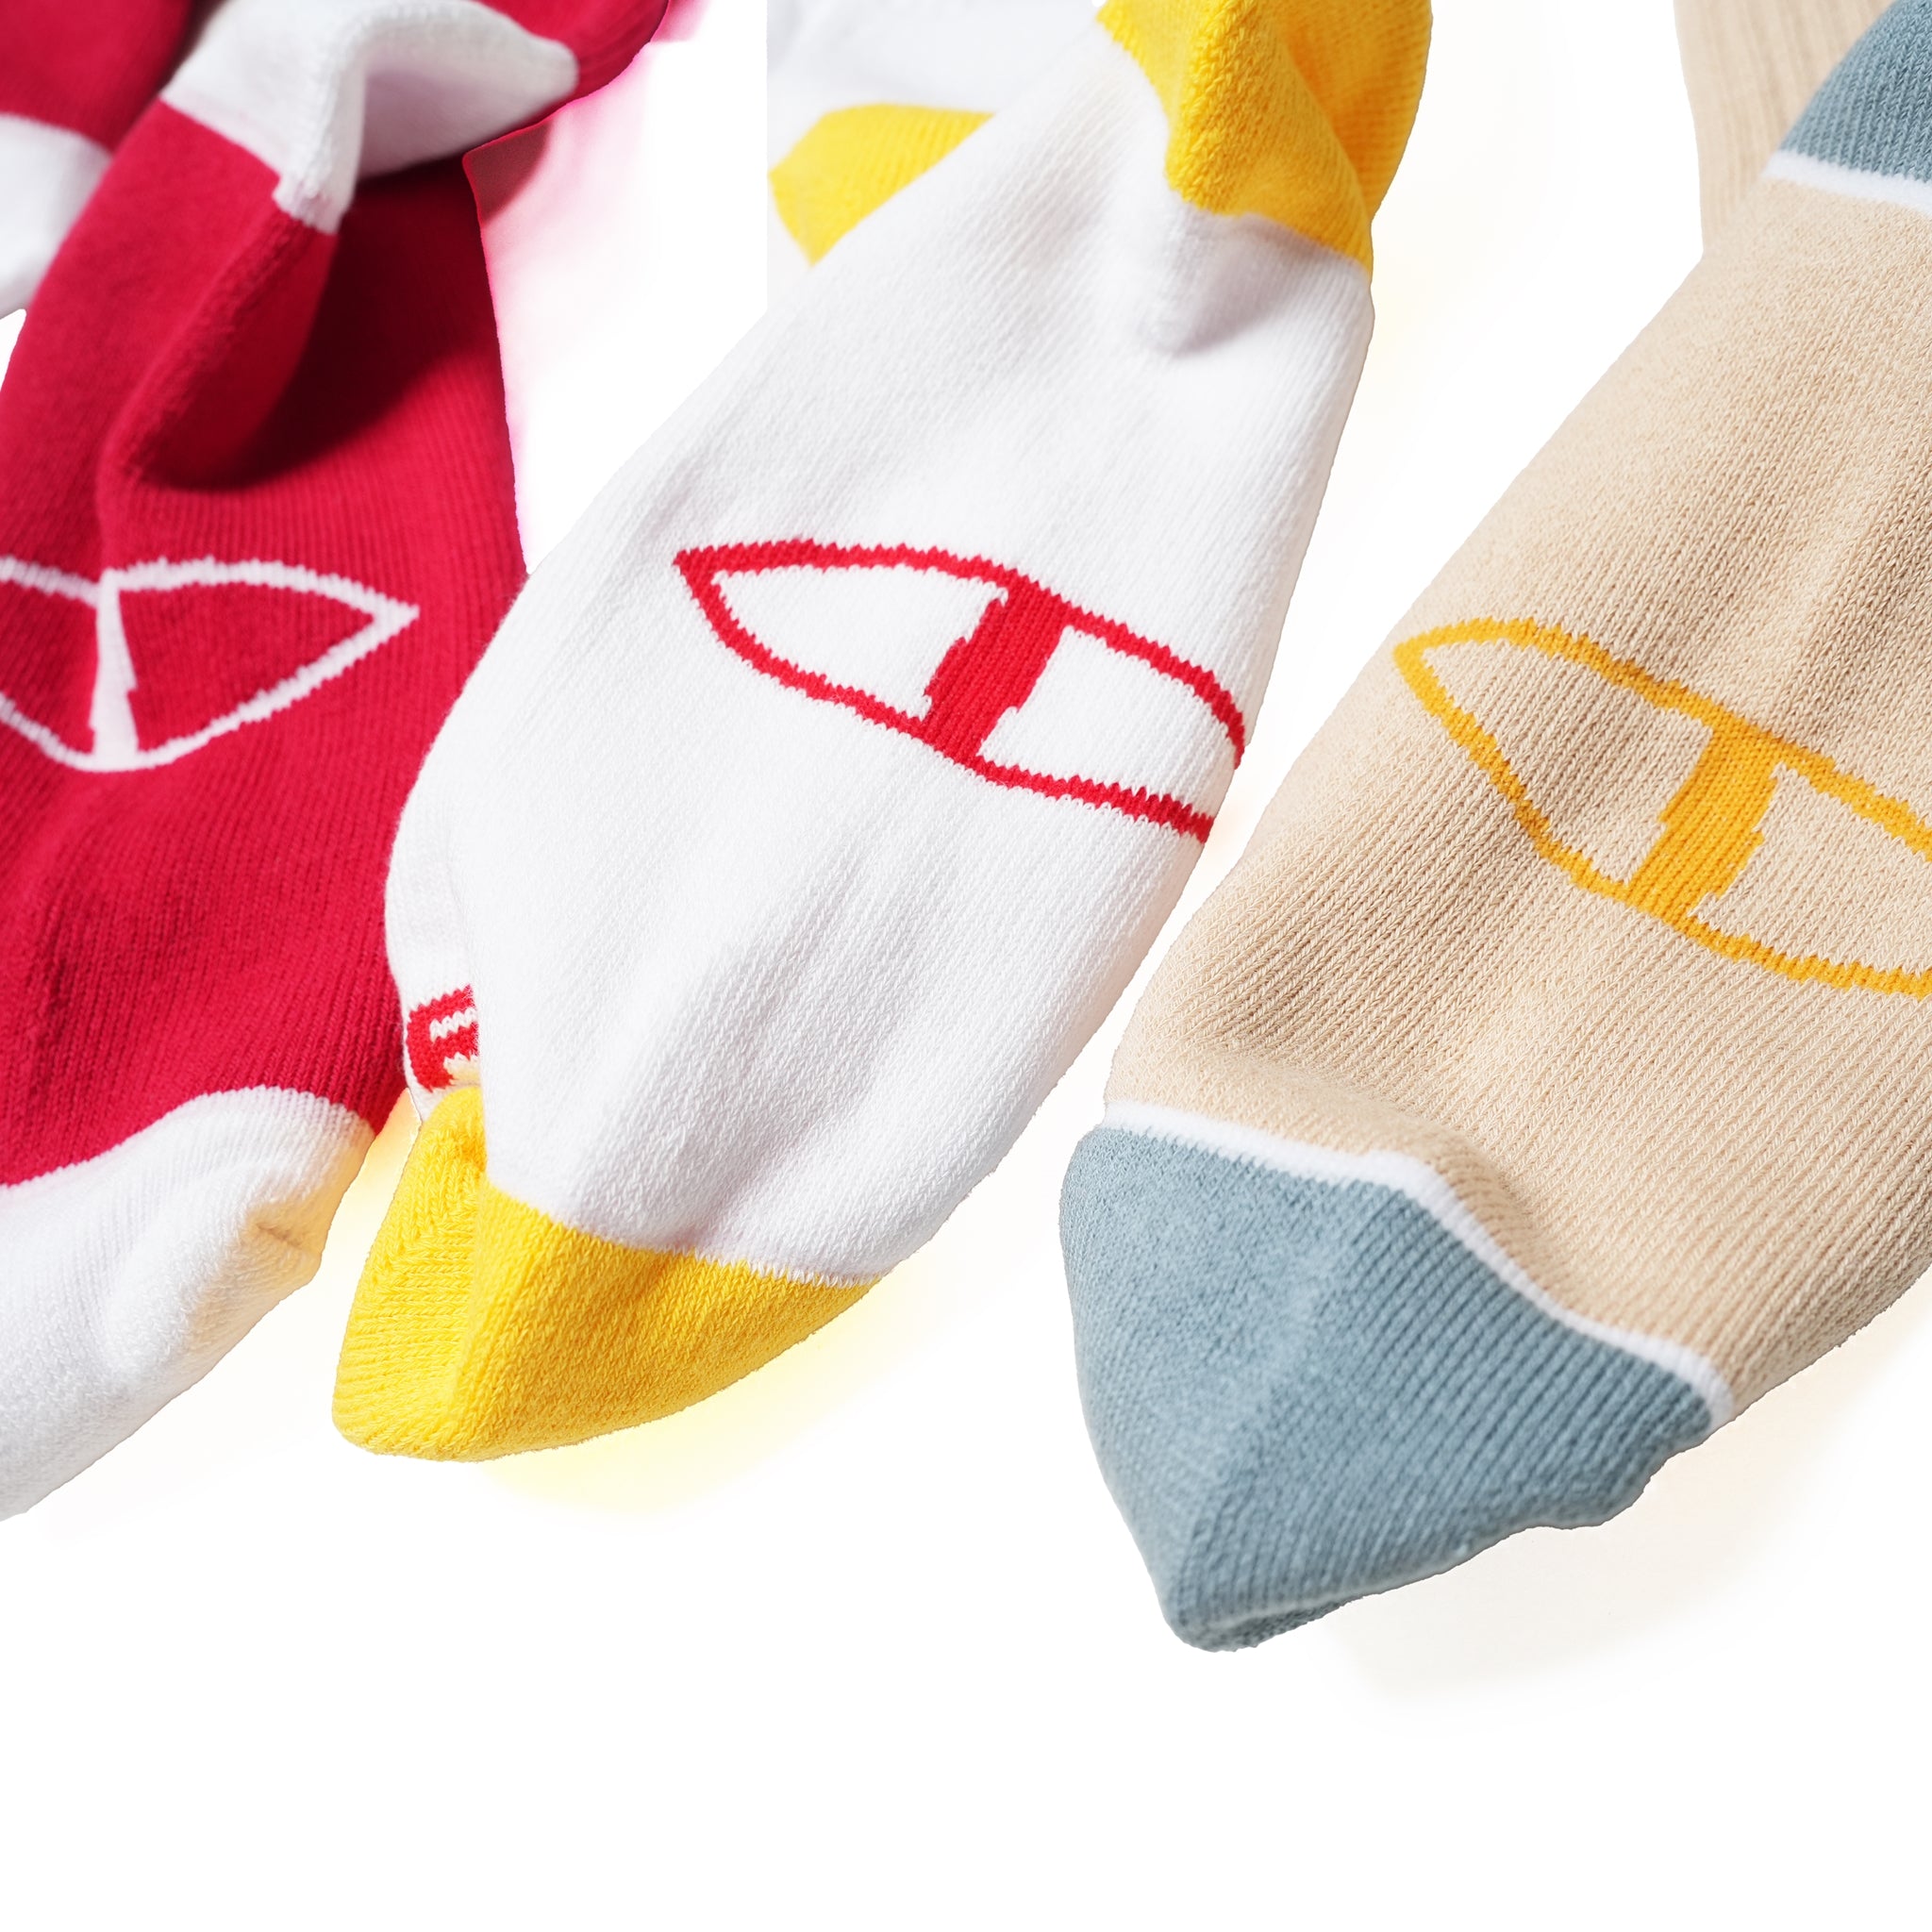 No:233ACUSK01 | Name:ICON SOCK 3-PACK | Color:Bruck【POLER_ポーラー】